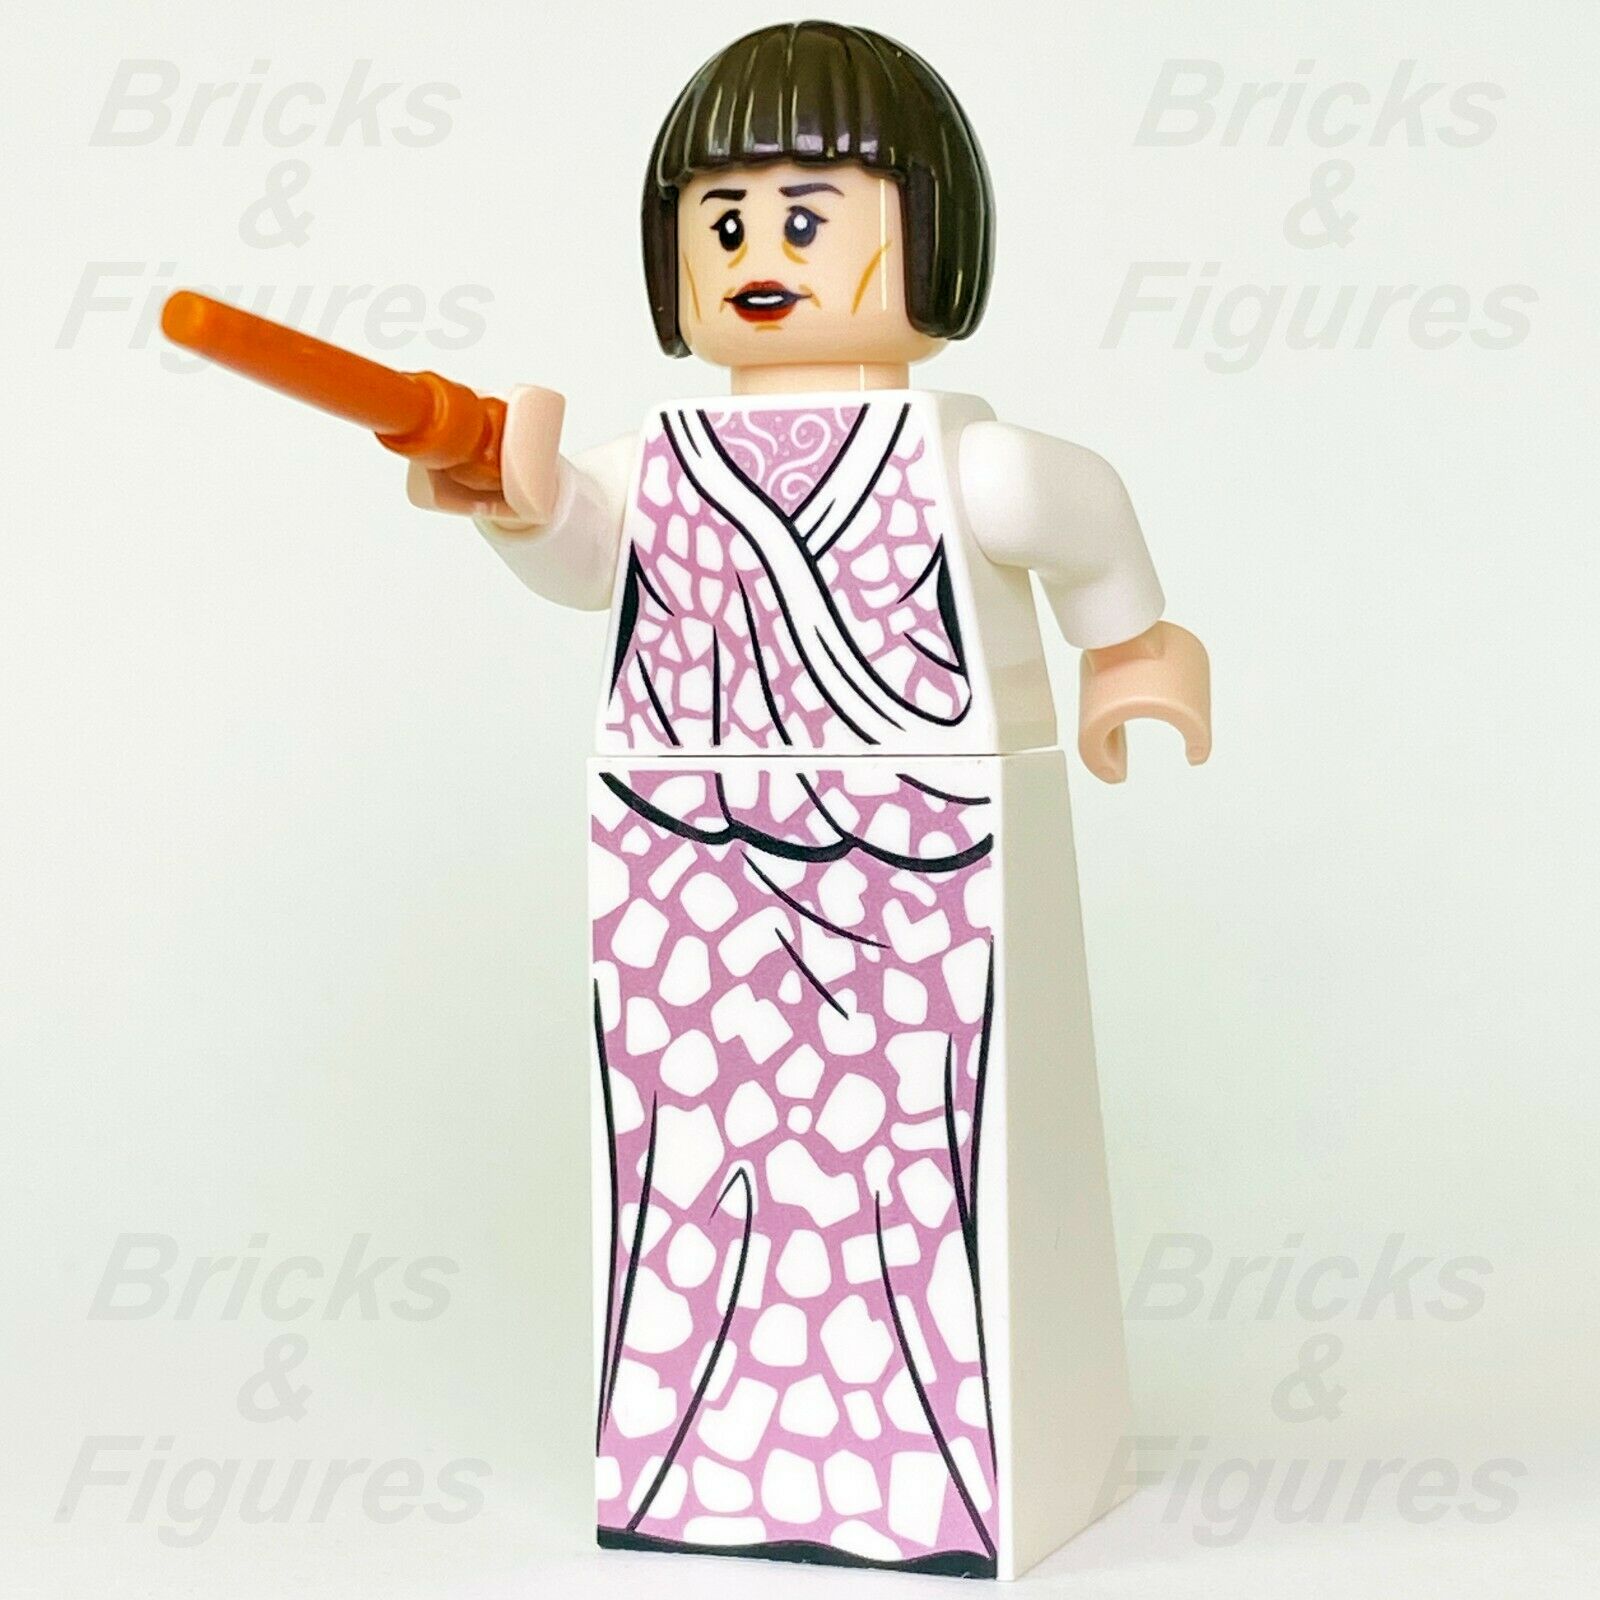 Harry Potter LEGO Madame Olympe Maxime Goblet of Fire Witch Minifig 75948 - Bricks & Figures